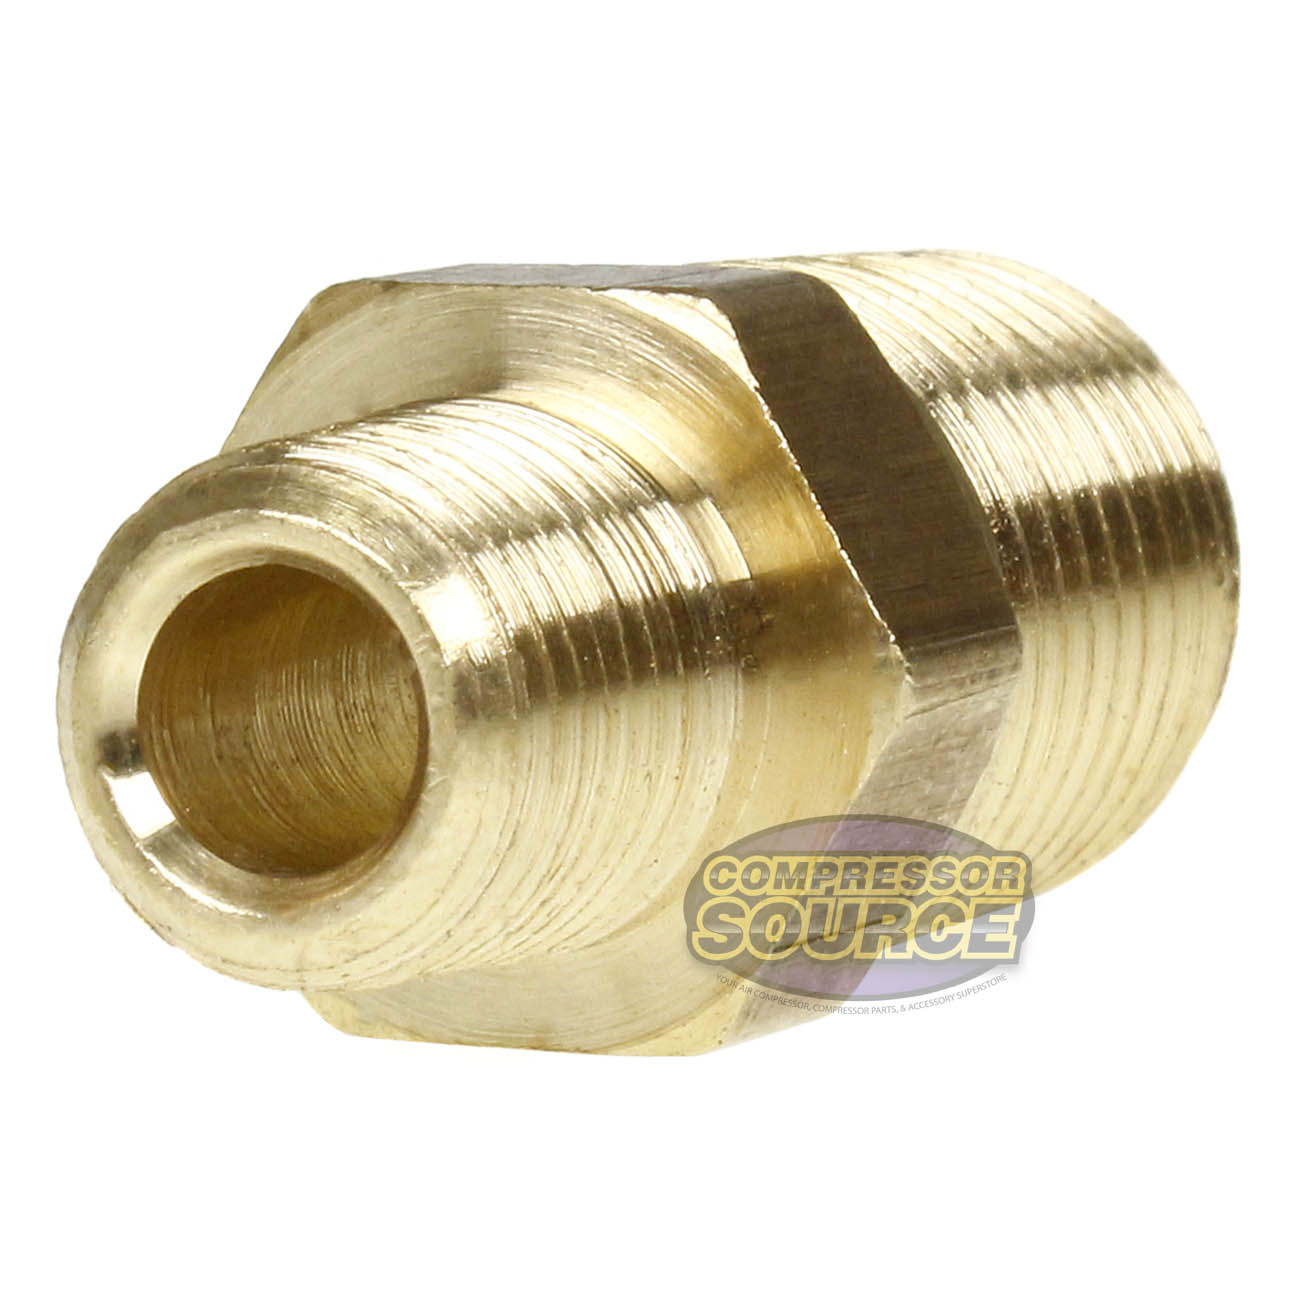 10 Pack 1/4" x 1/8" Male NPTF Pipe Reducing Hex Nipple Solid Brass Pipe Fitting